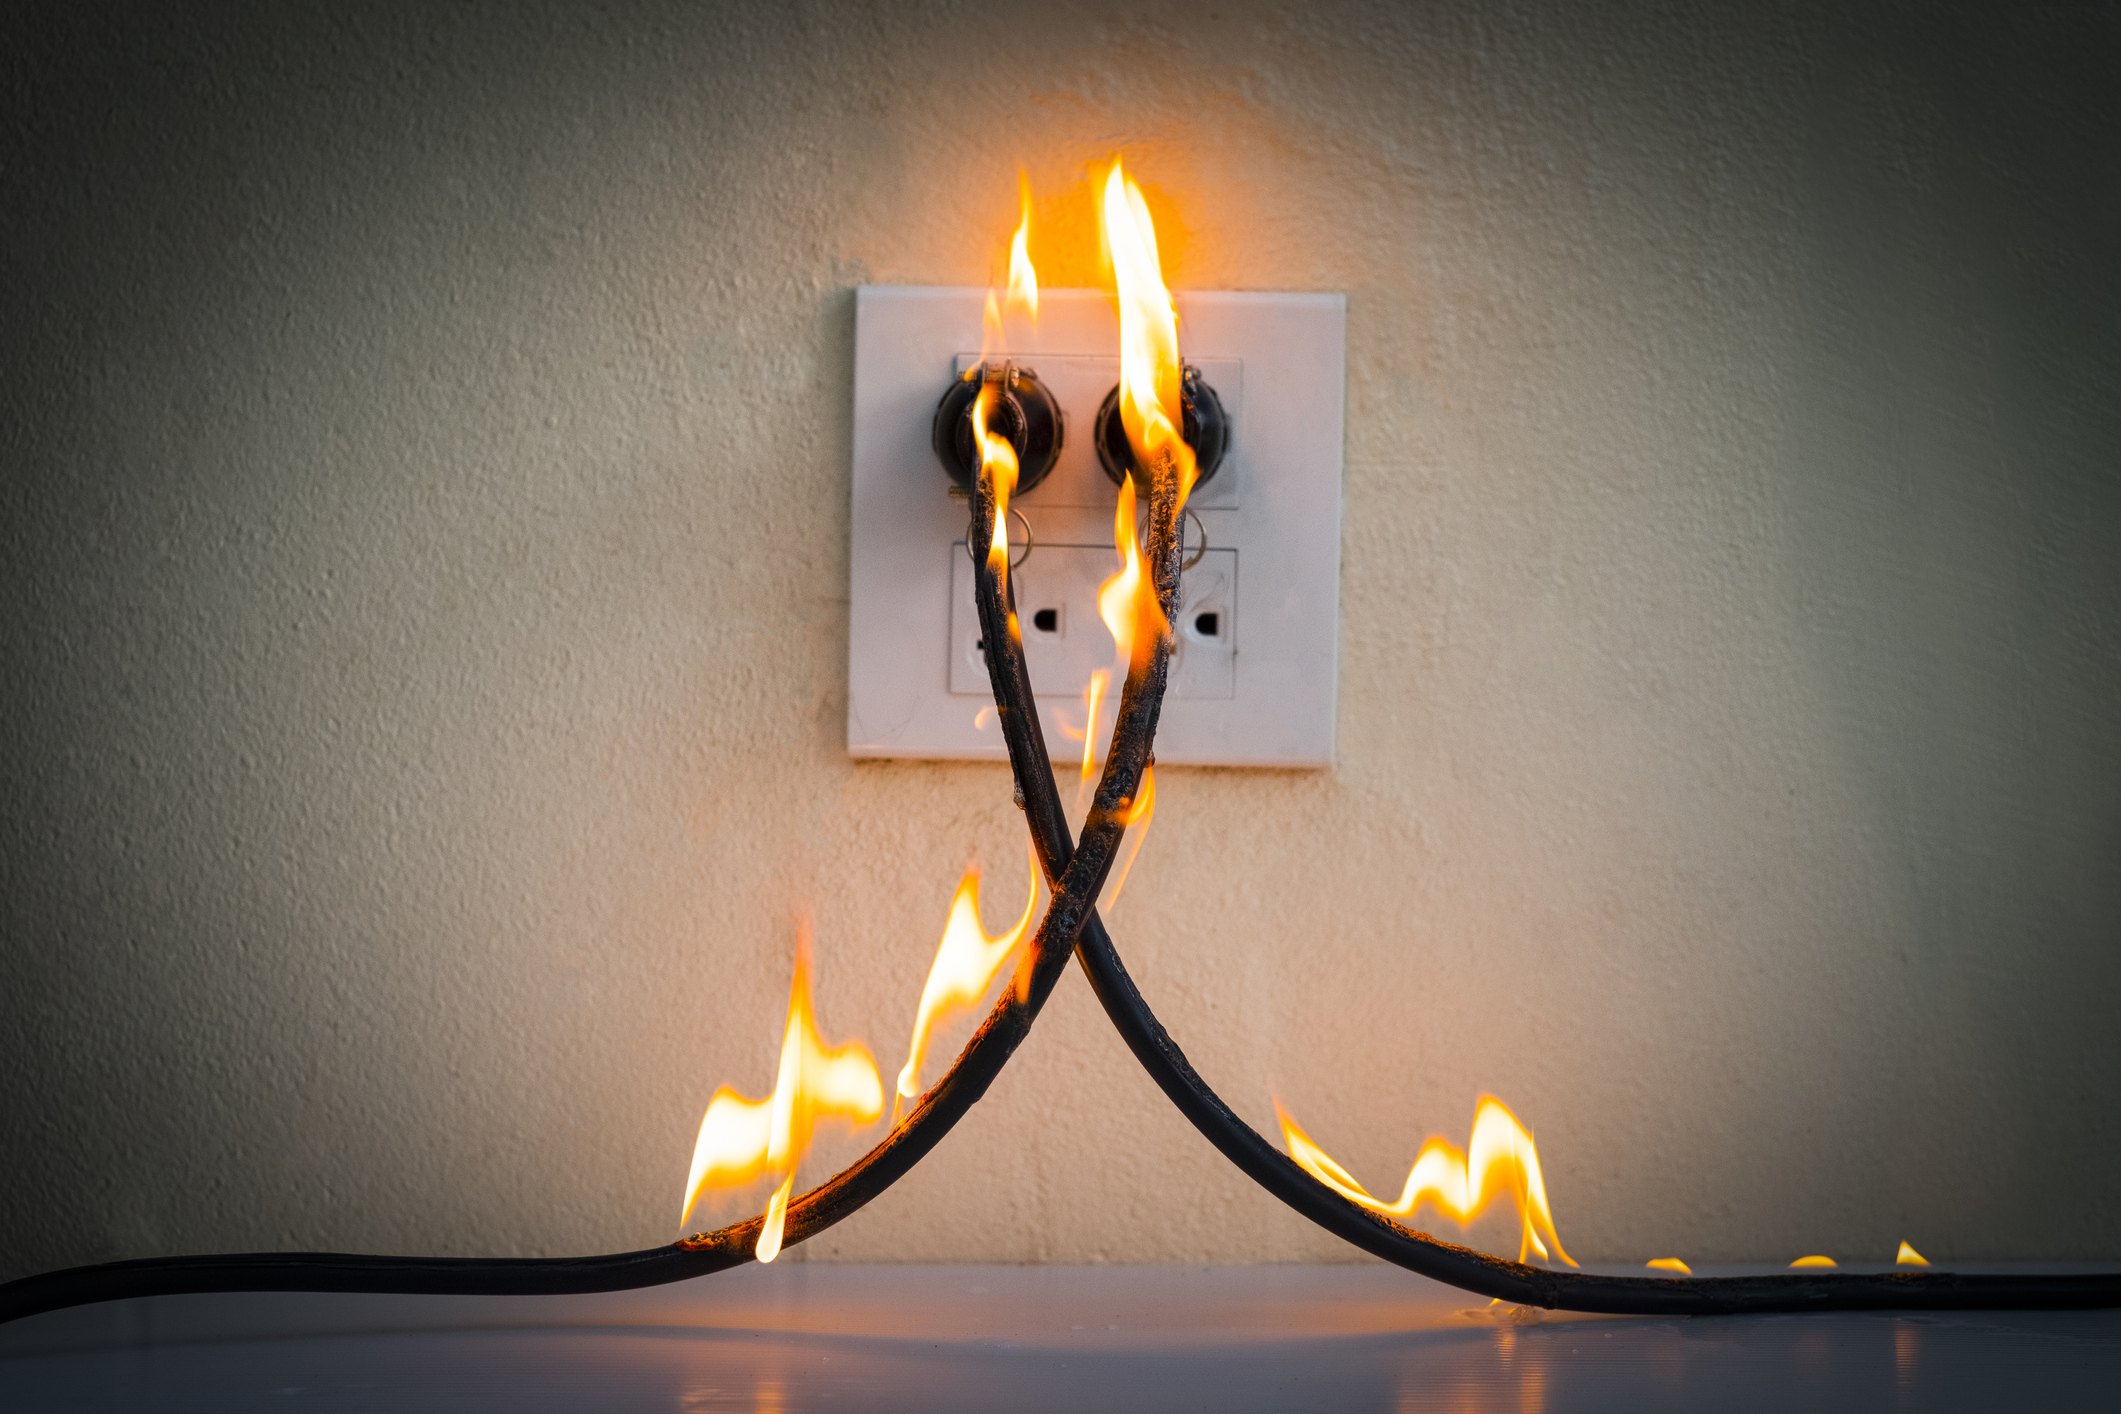 Follow These 5 Tips to Reduce the Chance You Cause an Electrical